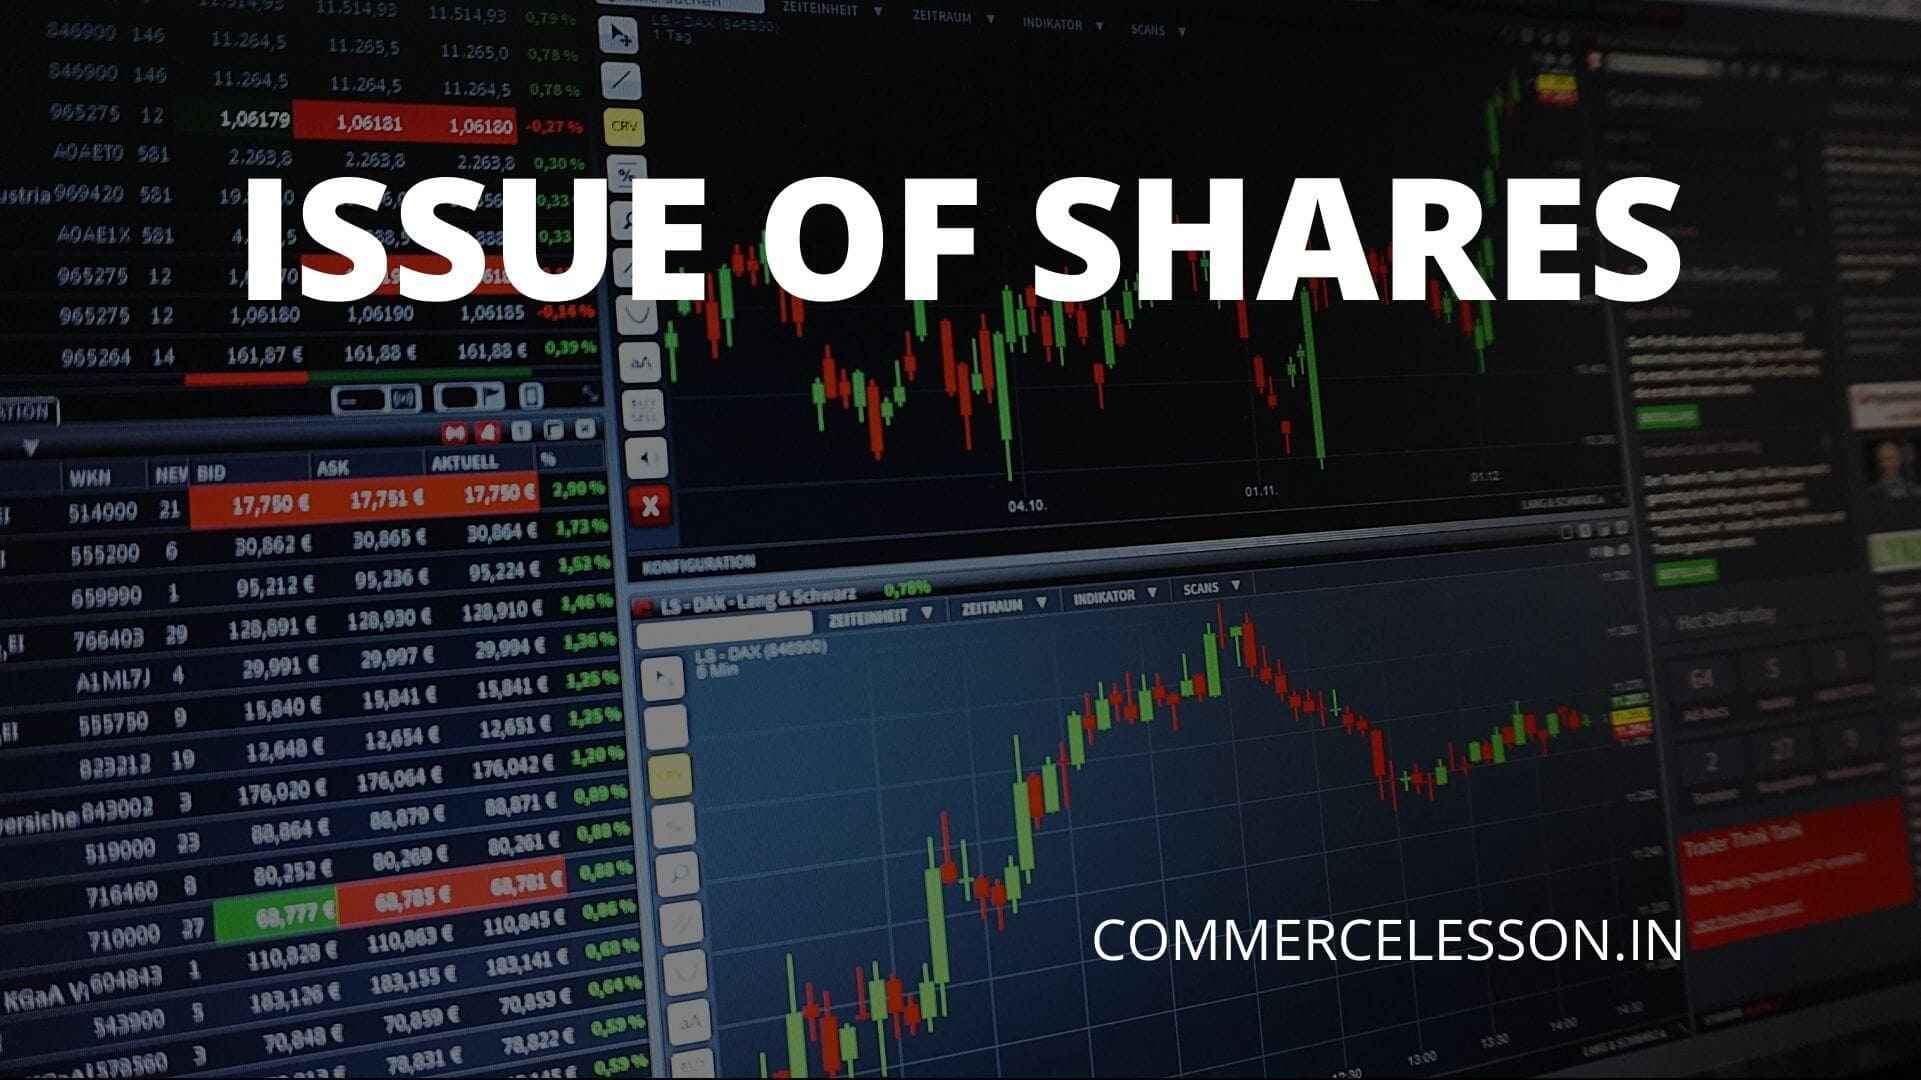 Issue of Shares at a premium